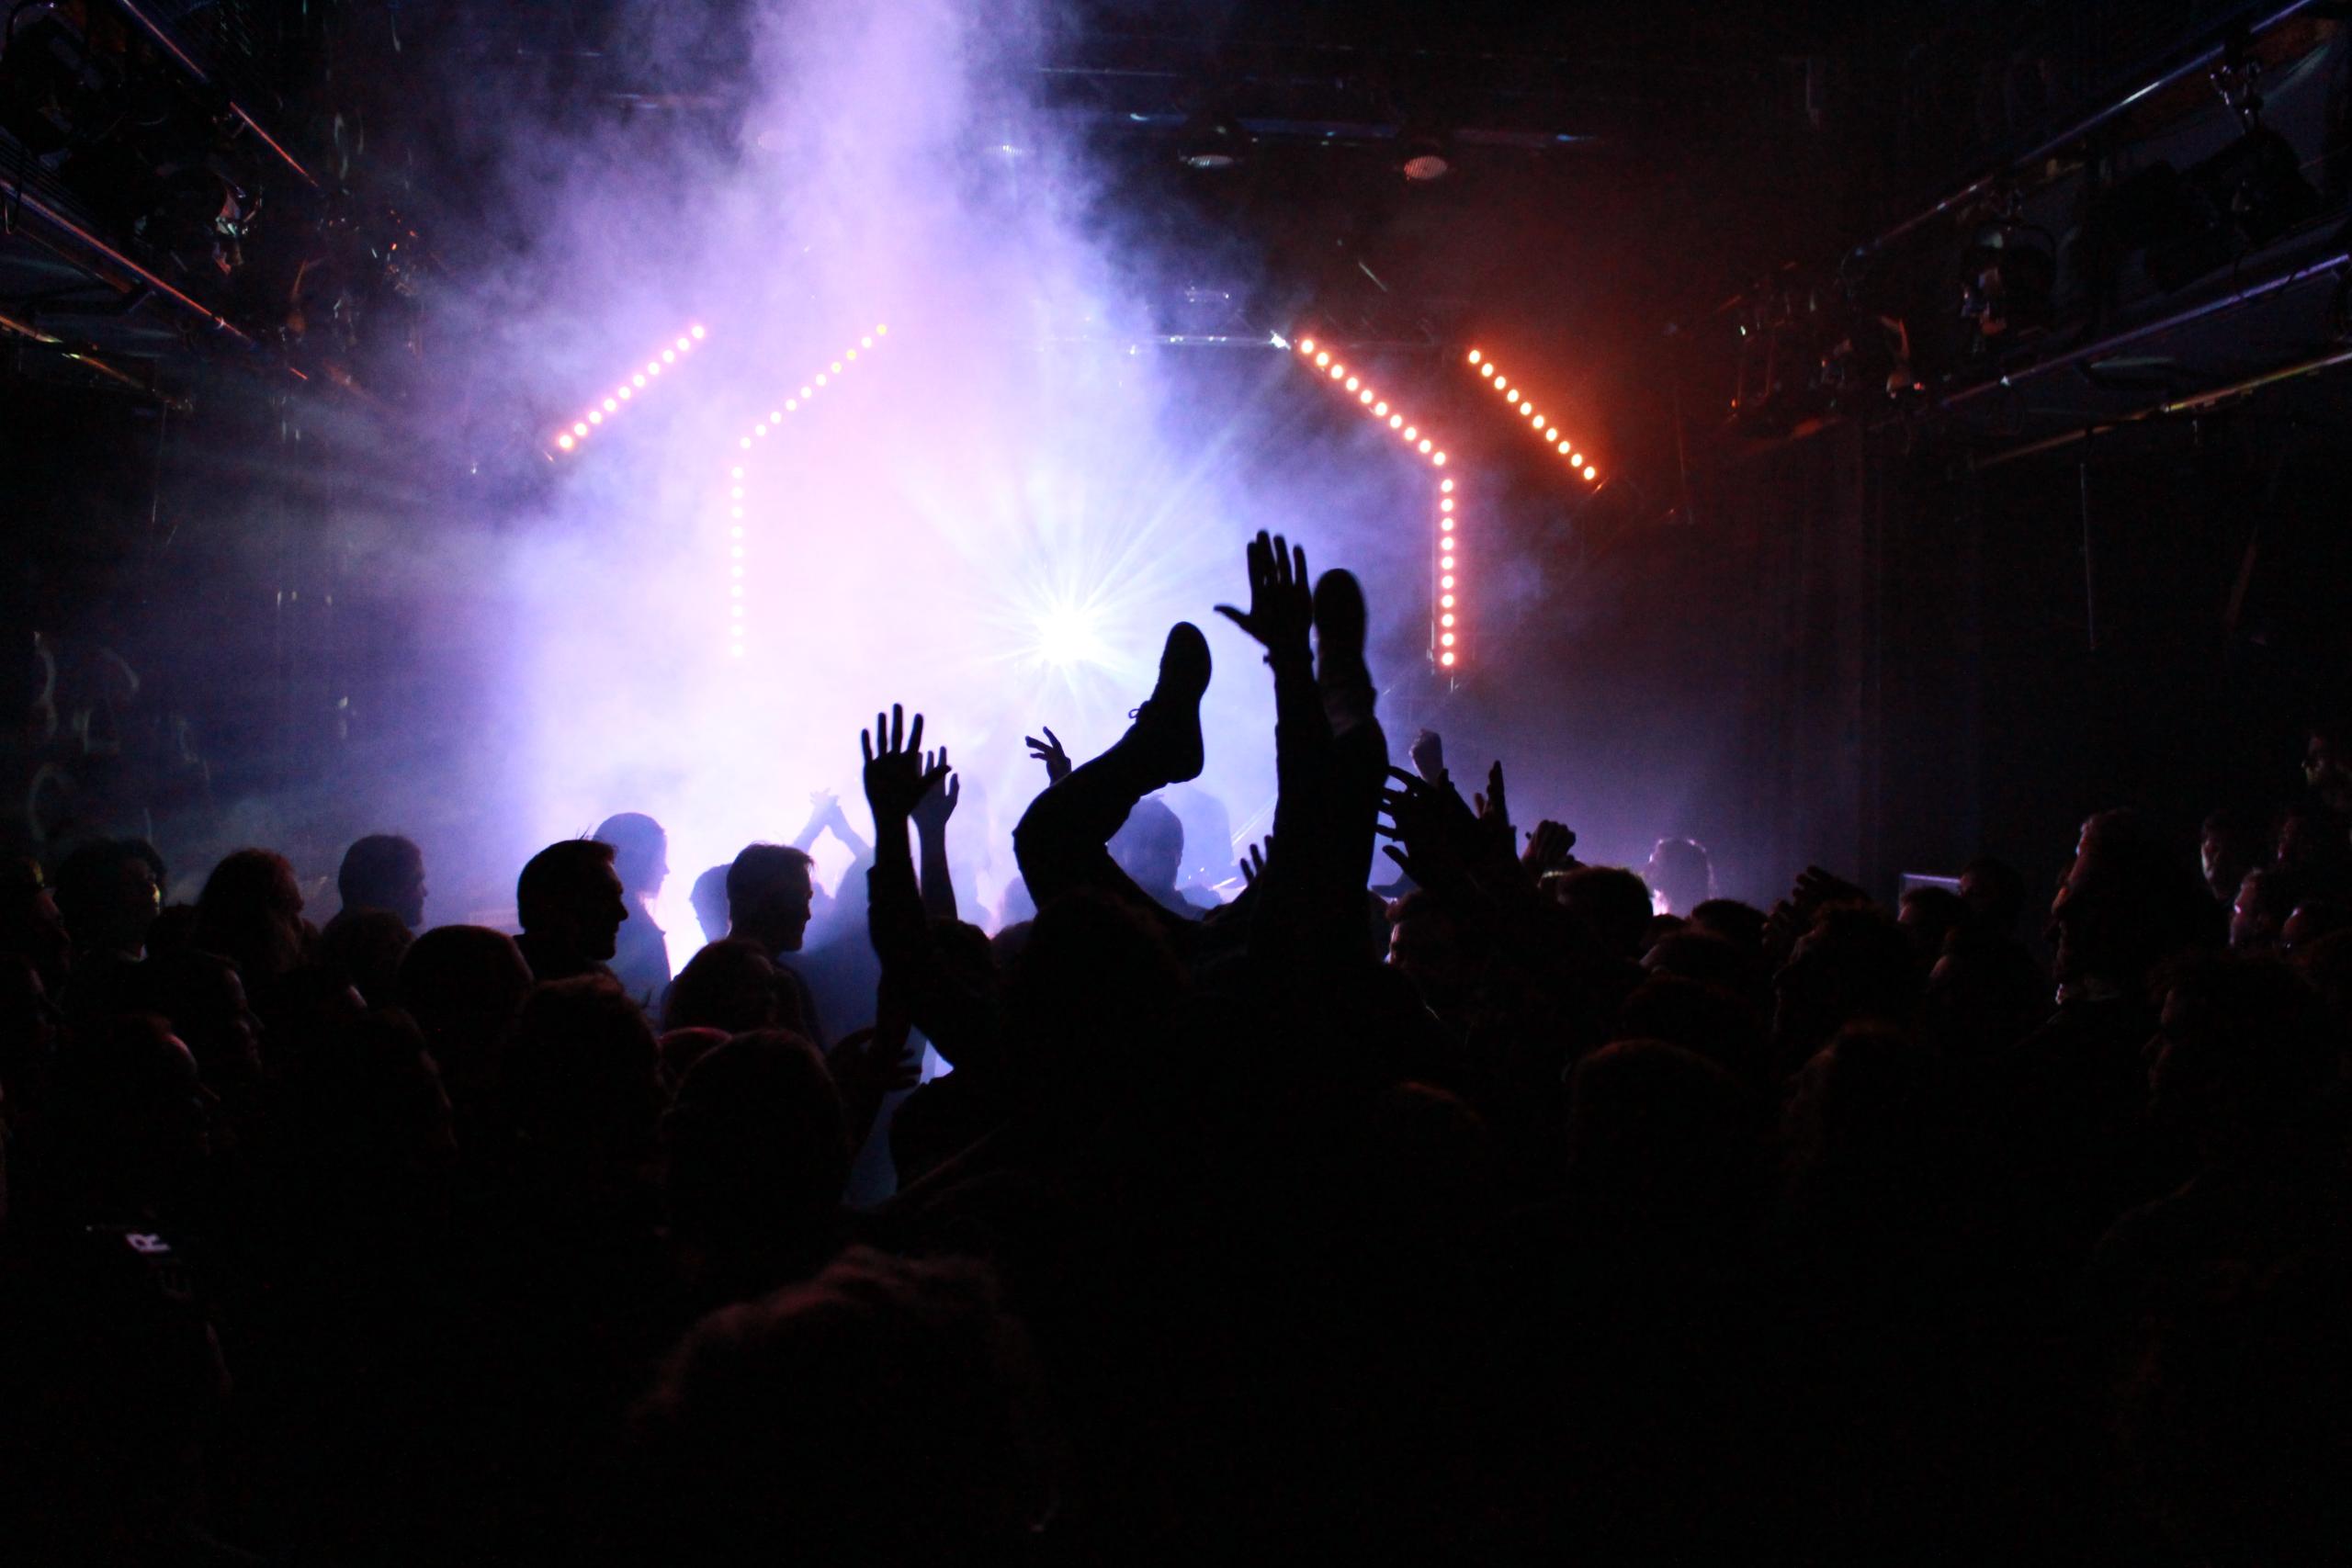 Silhouettes of audience in front of a brightly lit stage, a musician does stage diving and is carried by the audience, his legs pointing upwards.